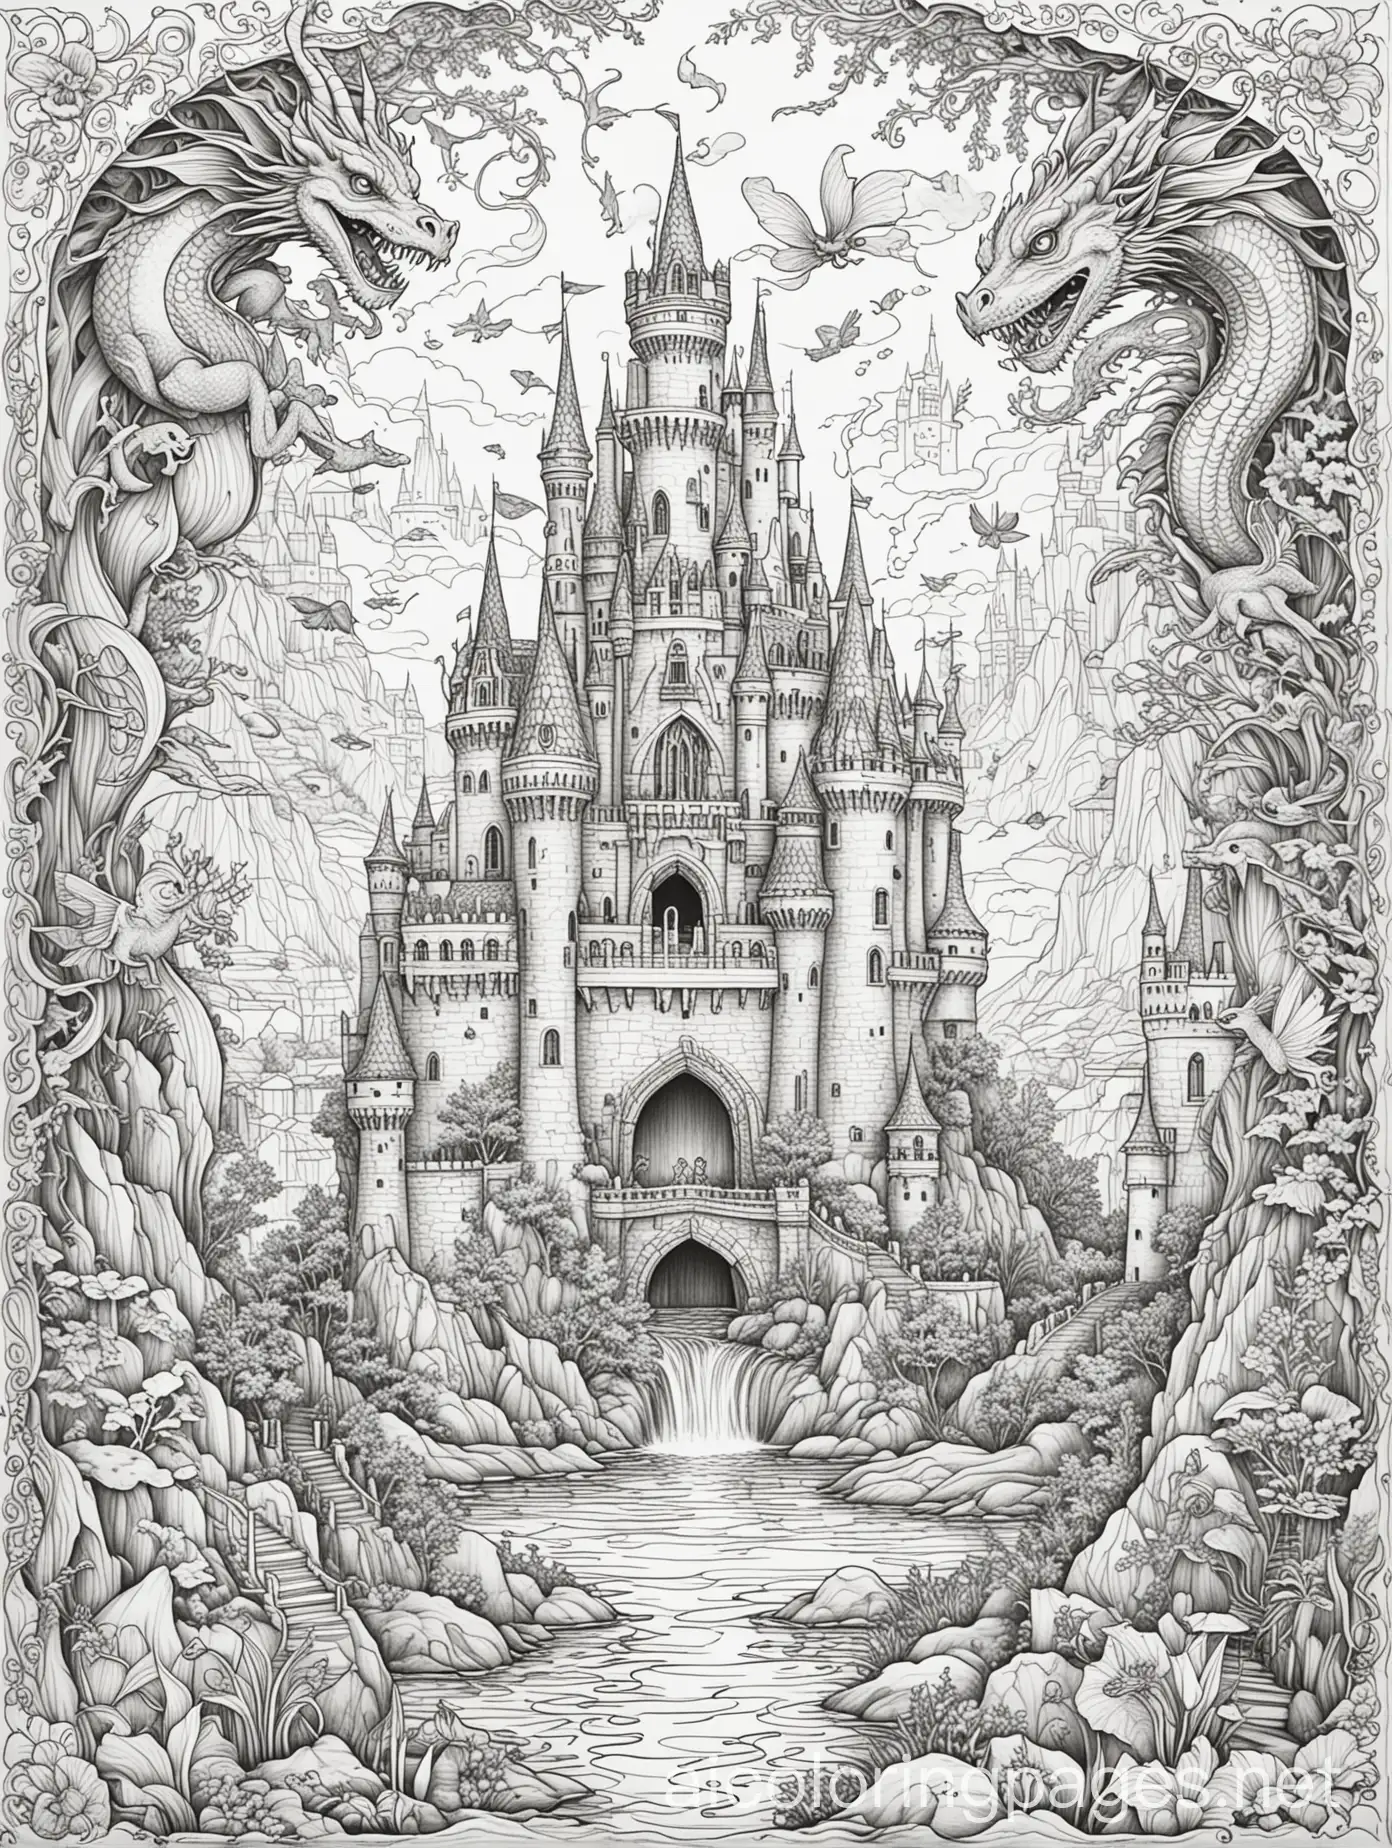 Fantasy-Castle-with-Dragon-Fairies-and-Mermaids-Coloring-Page